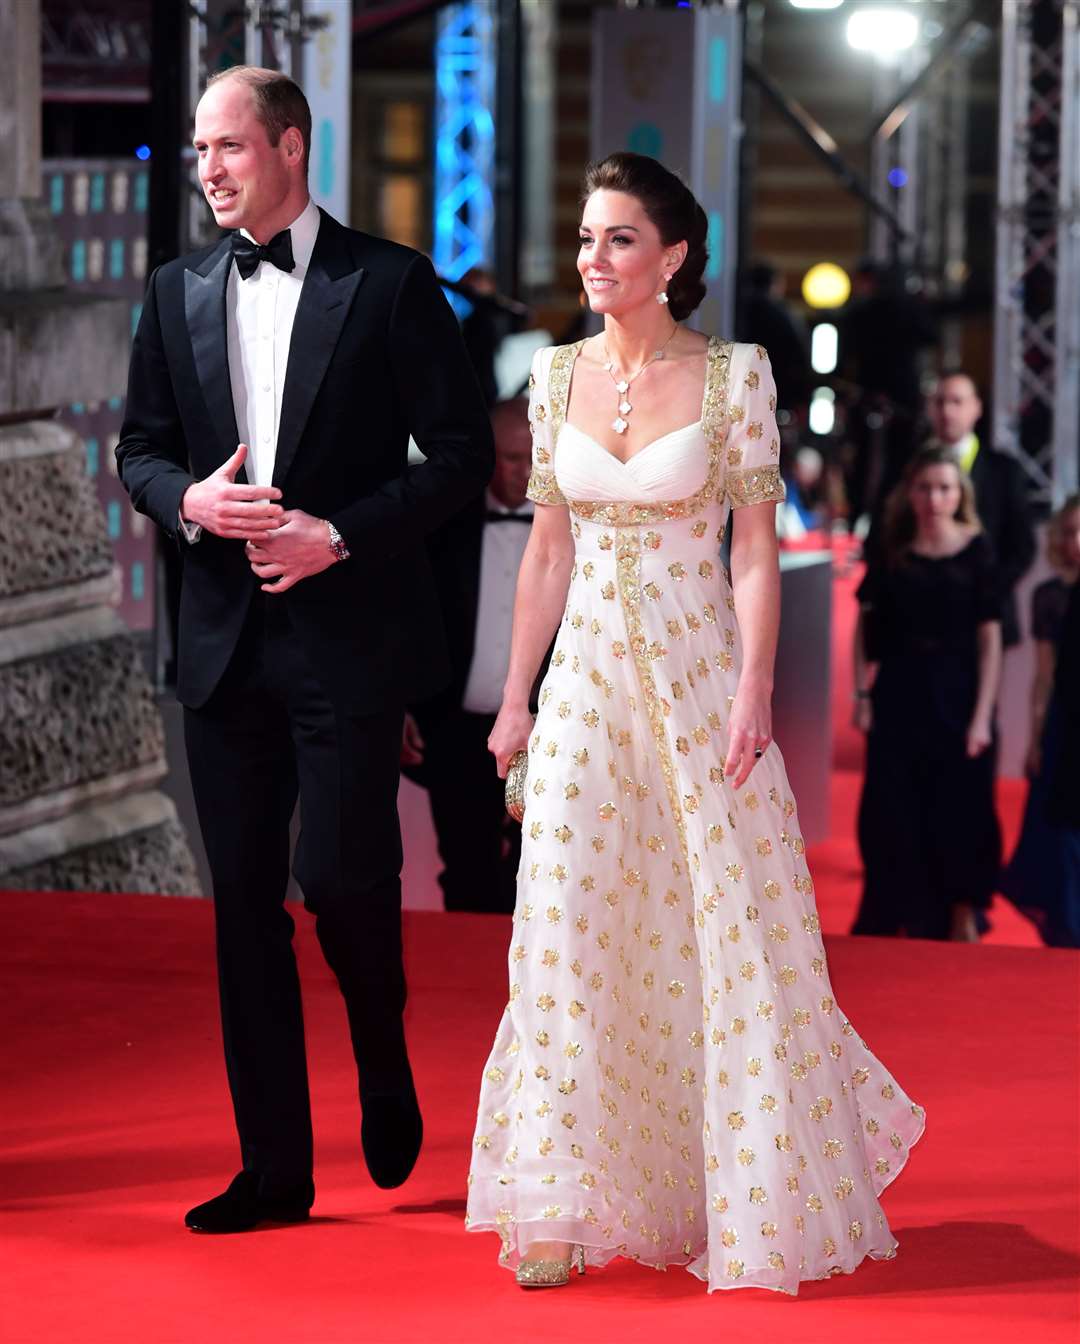 The duke and duchess on the red carpet at they attend the Baftas in February (Ian West/PA)